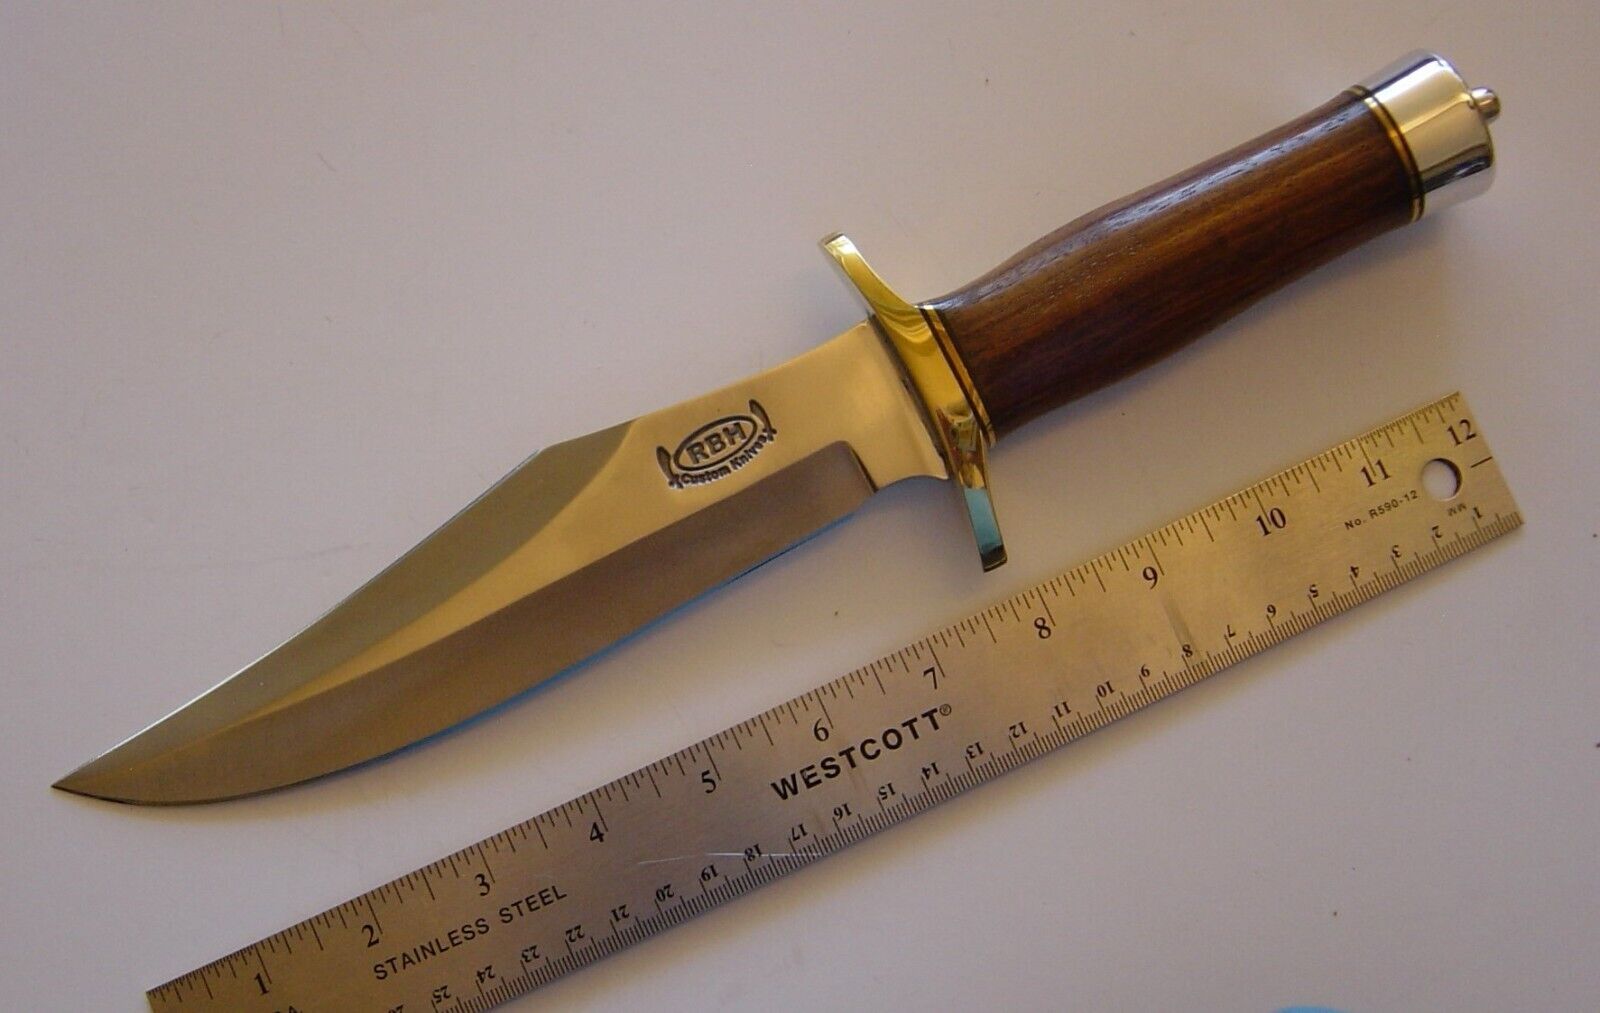 RBH Knife Bear Bowie Similar to Randall Knife, 7 7/8 inches, 5